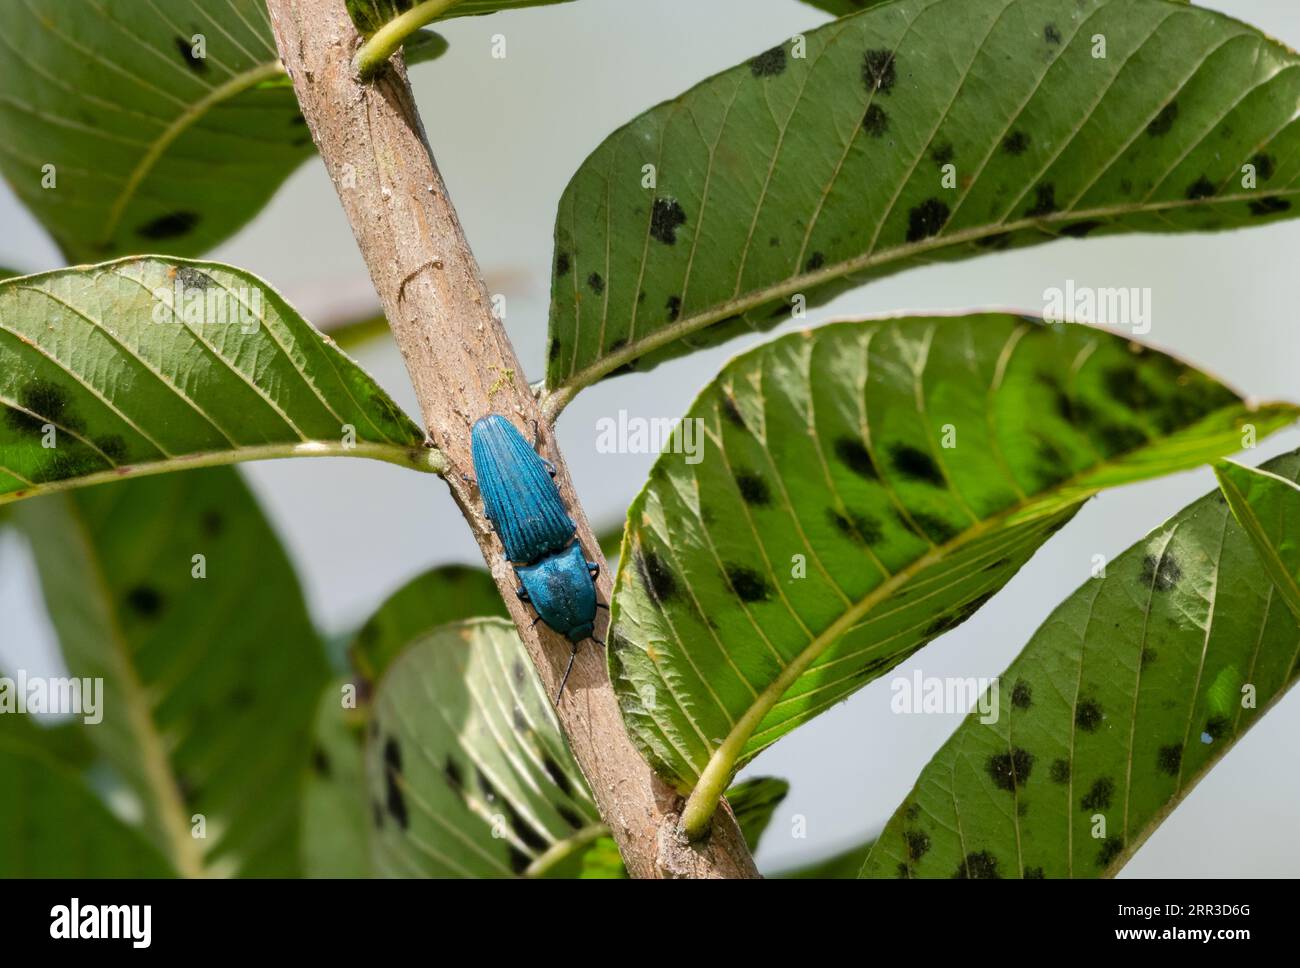 Iridescent blue beetle glittering in the sunlight, crawling on a branch with leaves Stock Photo